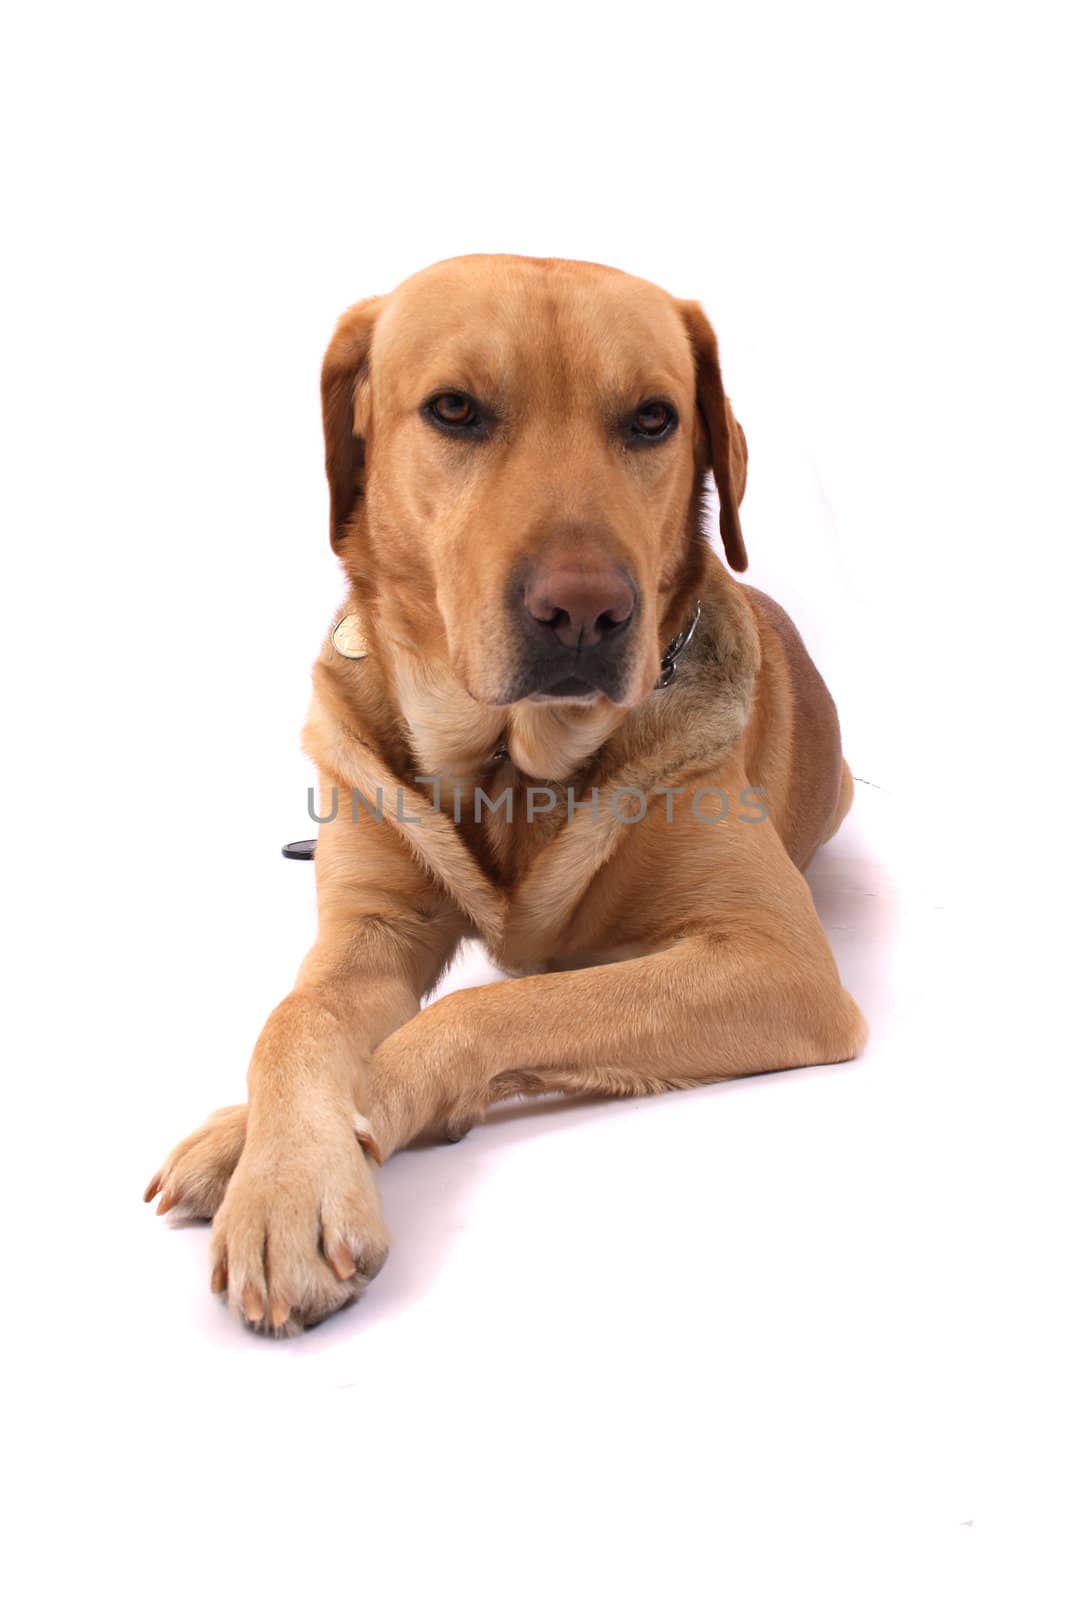 very nice labrador on the white background